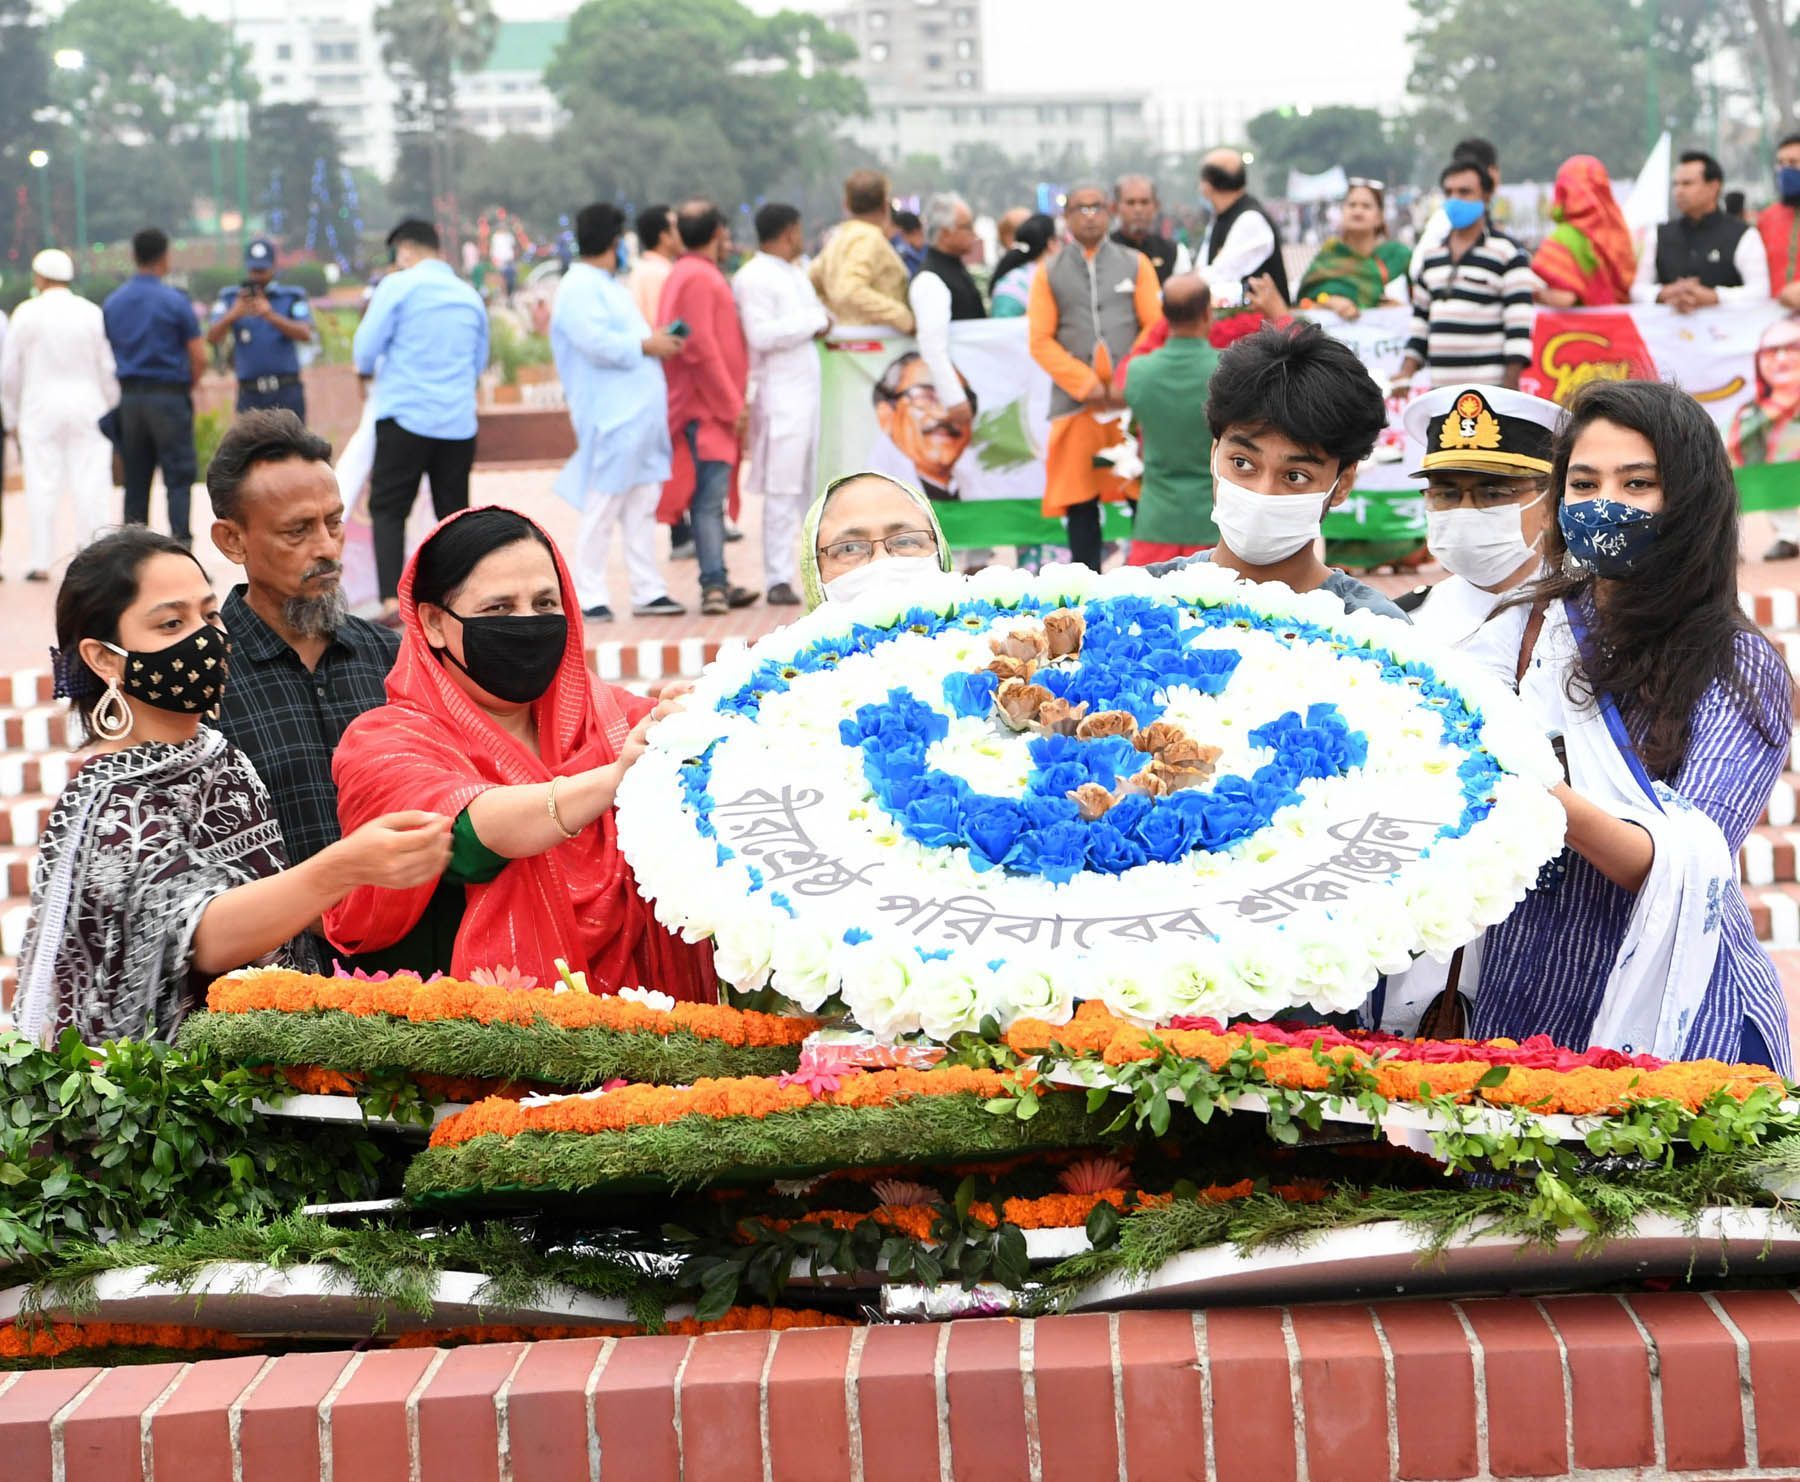 Families of Bir Sreshtho paid rich tributes to the Liberation War martyrs by placing wreaths at the National Memorial.